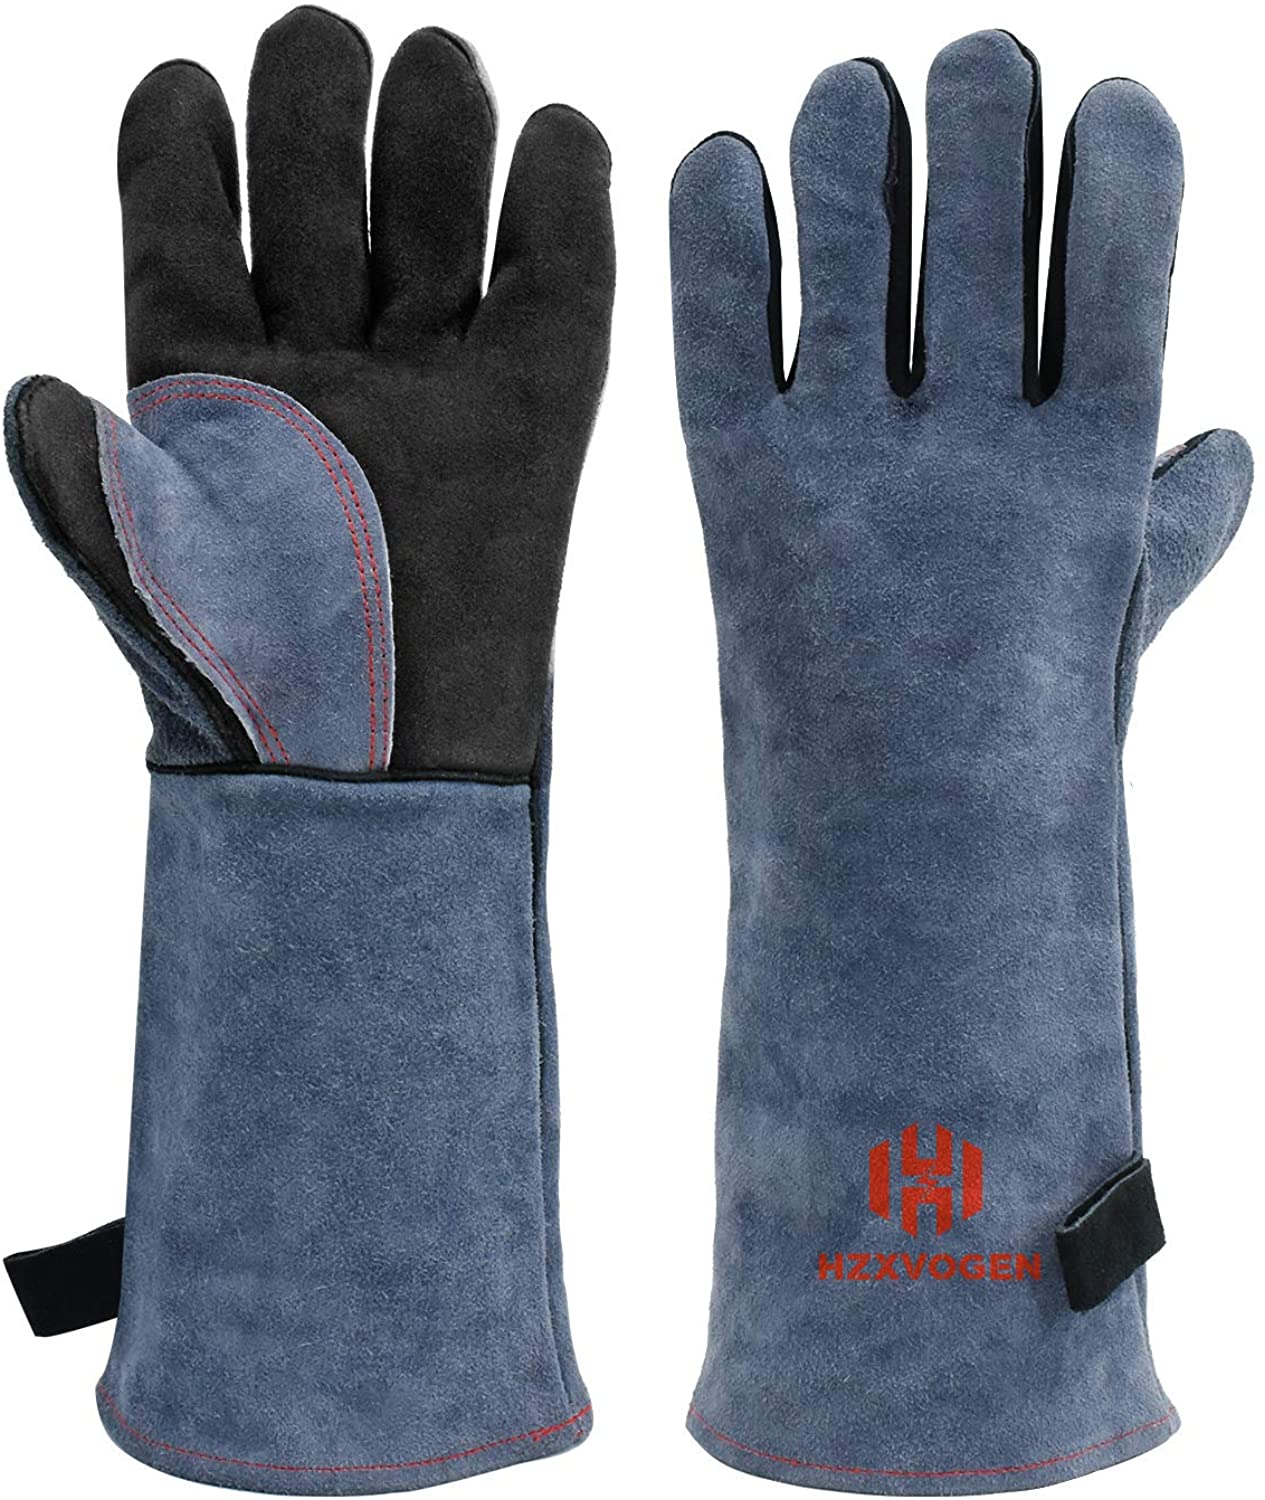 HZXVOGEN 16 Inches 932℉ Heat Fire Resistant Welding Gloves BBQ Grill Gloves  for Arc Tig Mig Wood Stove Barking Oven Fireplace Welder Gloves – Free